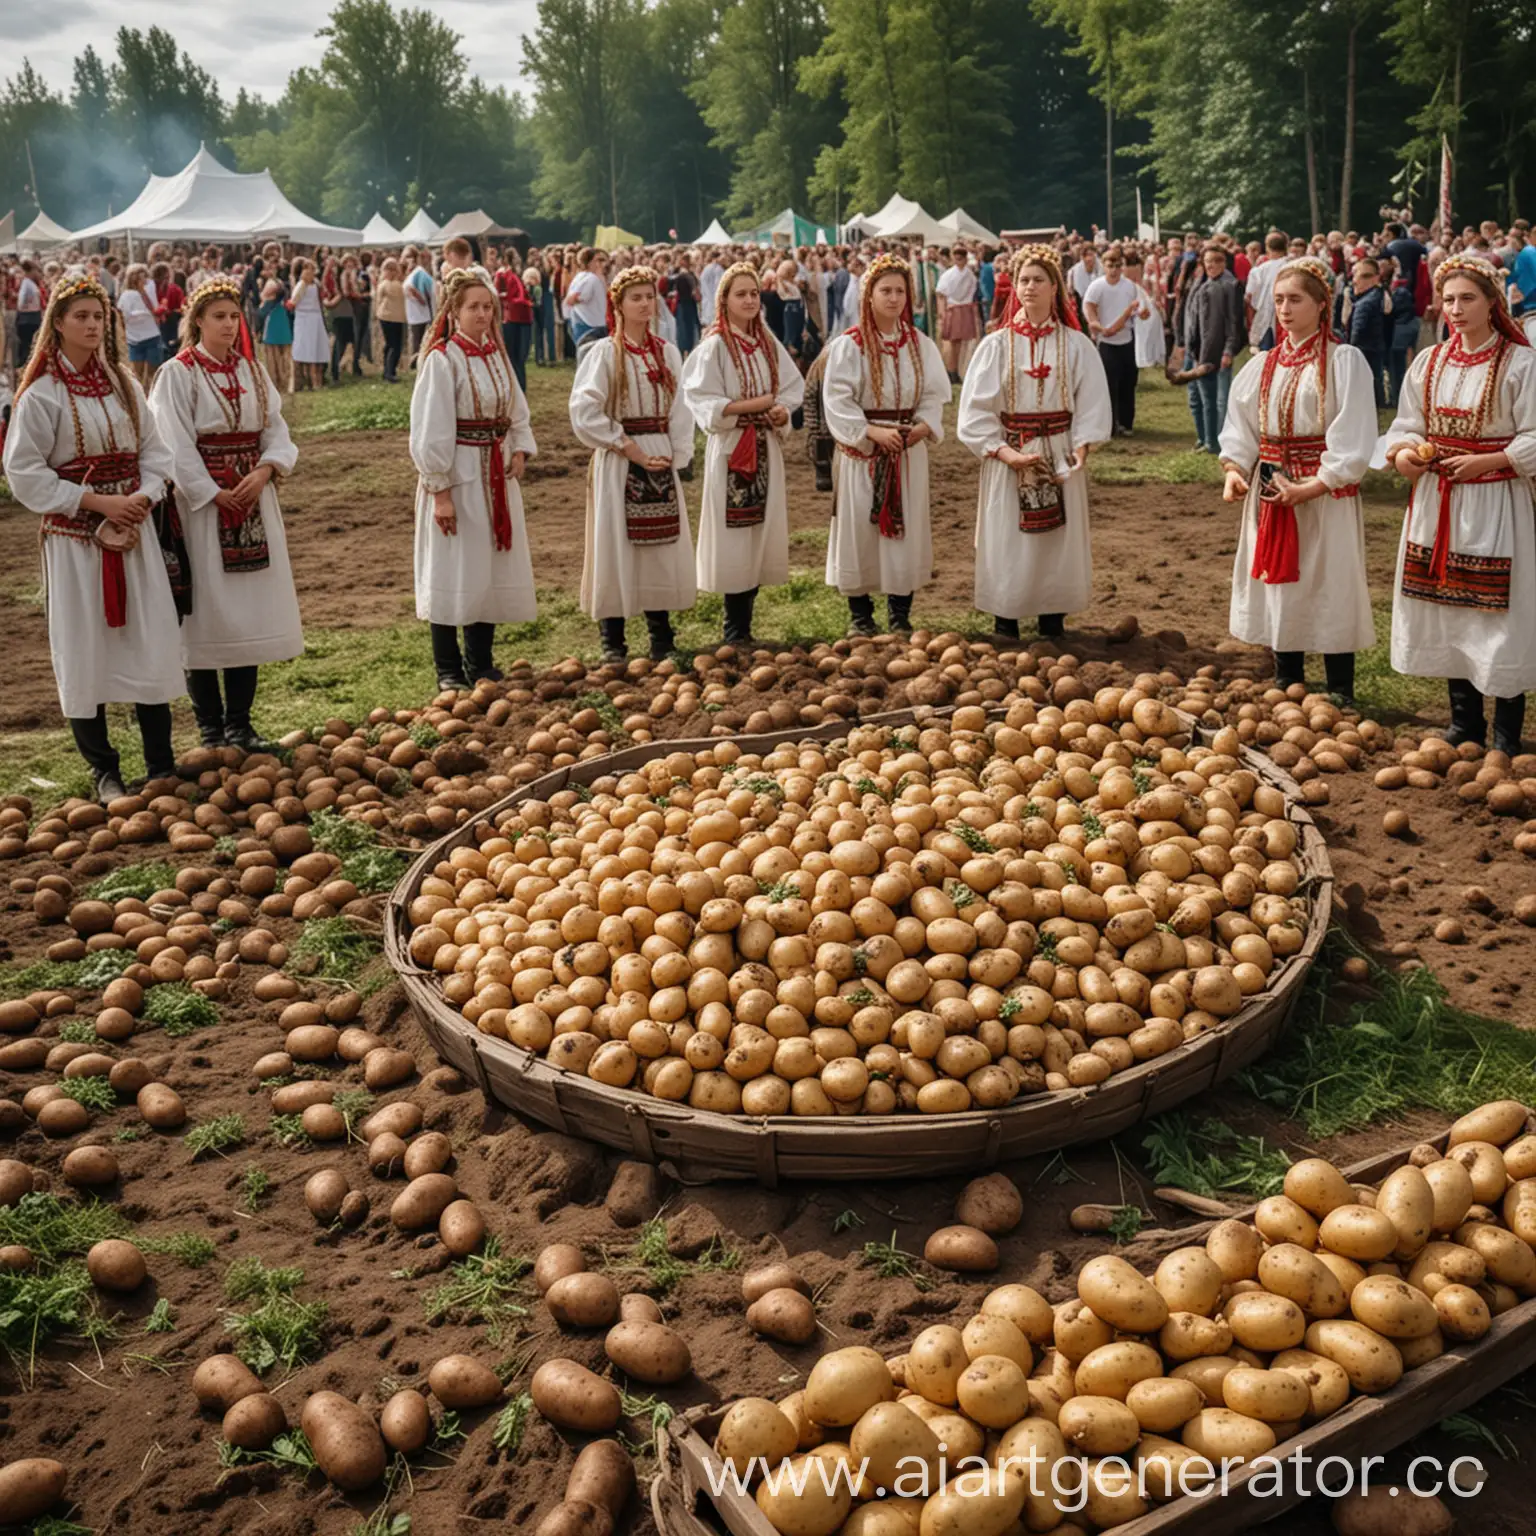 Сделай афишу данному мероприятию:The days of Belarusian culture in the UK will be held from 5 to 7 July, Several huge pavilions and a potato field will be allocated for these events. These pavilions will host a concert program, a separate one will be allocated for competitions, and the rest will contain food courts whith draniki, warlocks, dumplings and so on, аnd exhibition halls.
The poster will include an exhibition of Belarusian literature and painting.  A cinema with exclusively Belarusian cinema will also be organized. The concert program includes a performance by the iconic Belarusian ensemble «Pesnyary». A competition on eating pancakes will be held in the central pavilion, where the main prize will be a bag of selected Belarusian potatoes.  There will also be a master class on digging potatoes from Belarusian professionals right on the field.
The date of the days of Belarusian culture was chosen for a reason, it is planned to coincide with the Belarusian traditional holiday Kupala, which is celebrated on the night of July 6-7. The holiday will be held in all Belarusian traditions, including the burning of a bonfire. Novice Belarusian musicians will be able to show themselves internationally at the youth music competition.
